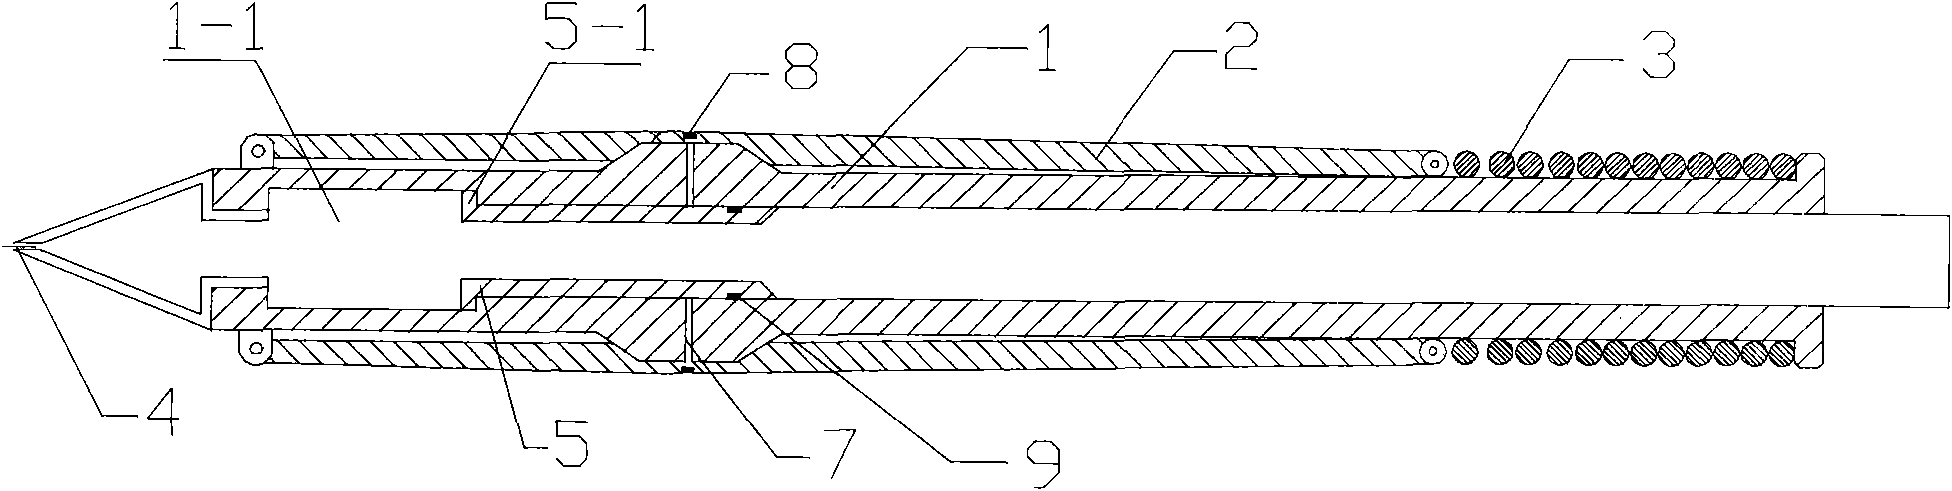 Hydraulic cutting nozzle with residue filer device